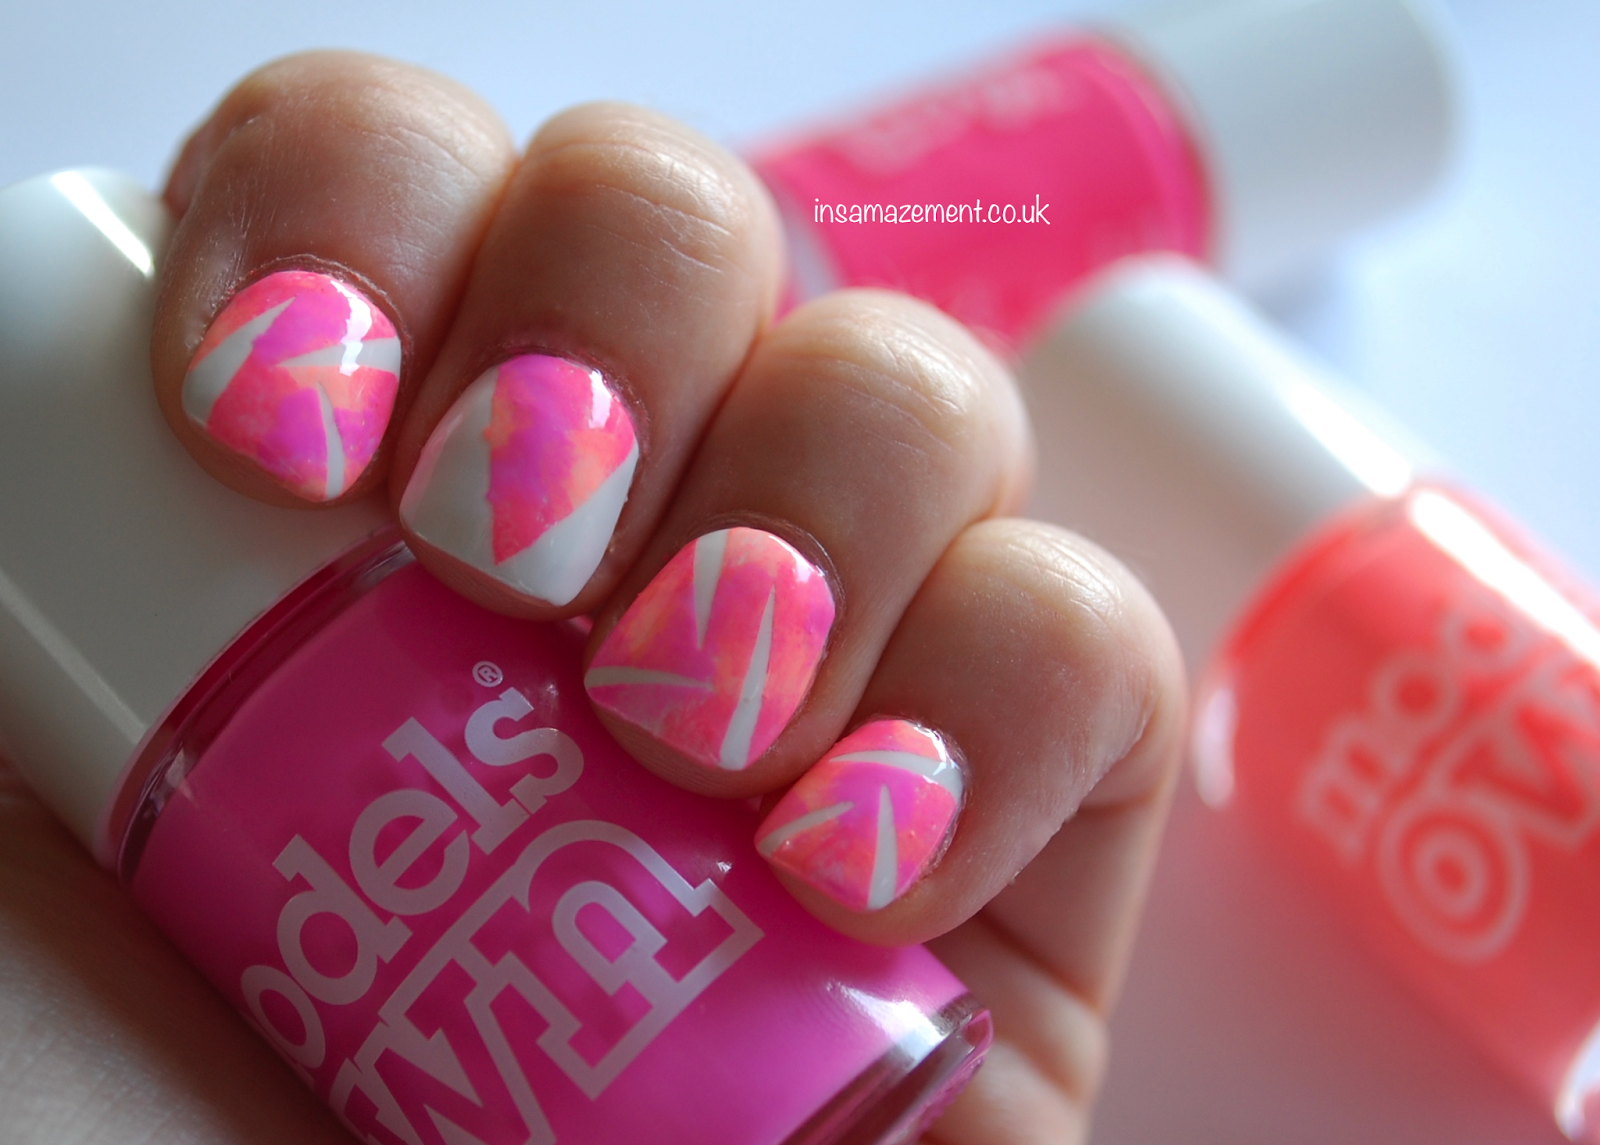 6. Bright Pink and Blue Tie-Dye Nail Design - wide 7